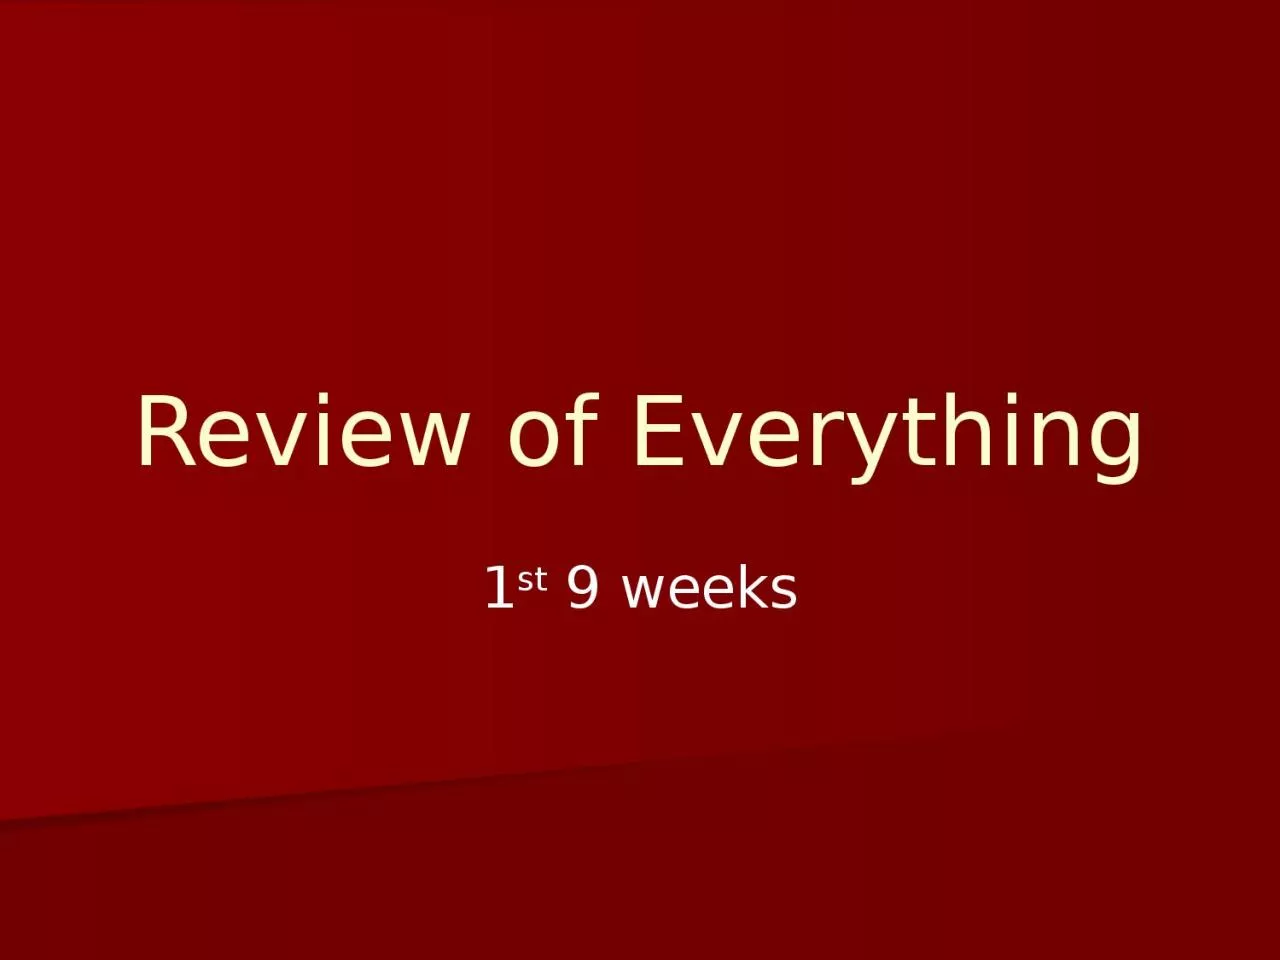 1 st  9 weeks Review of Everything